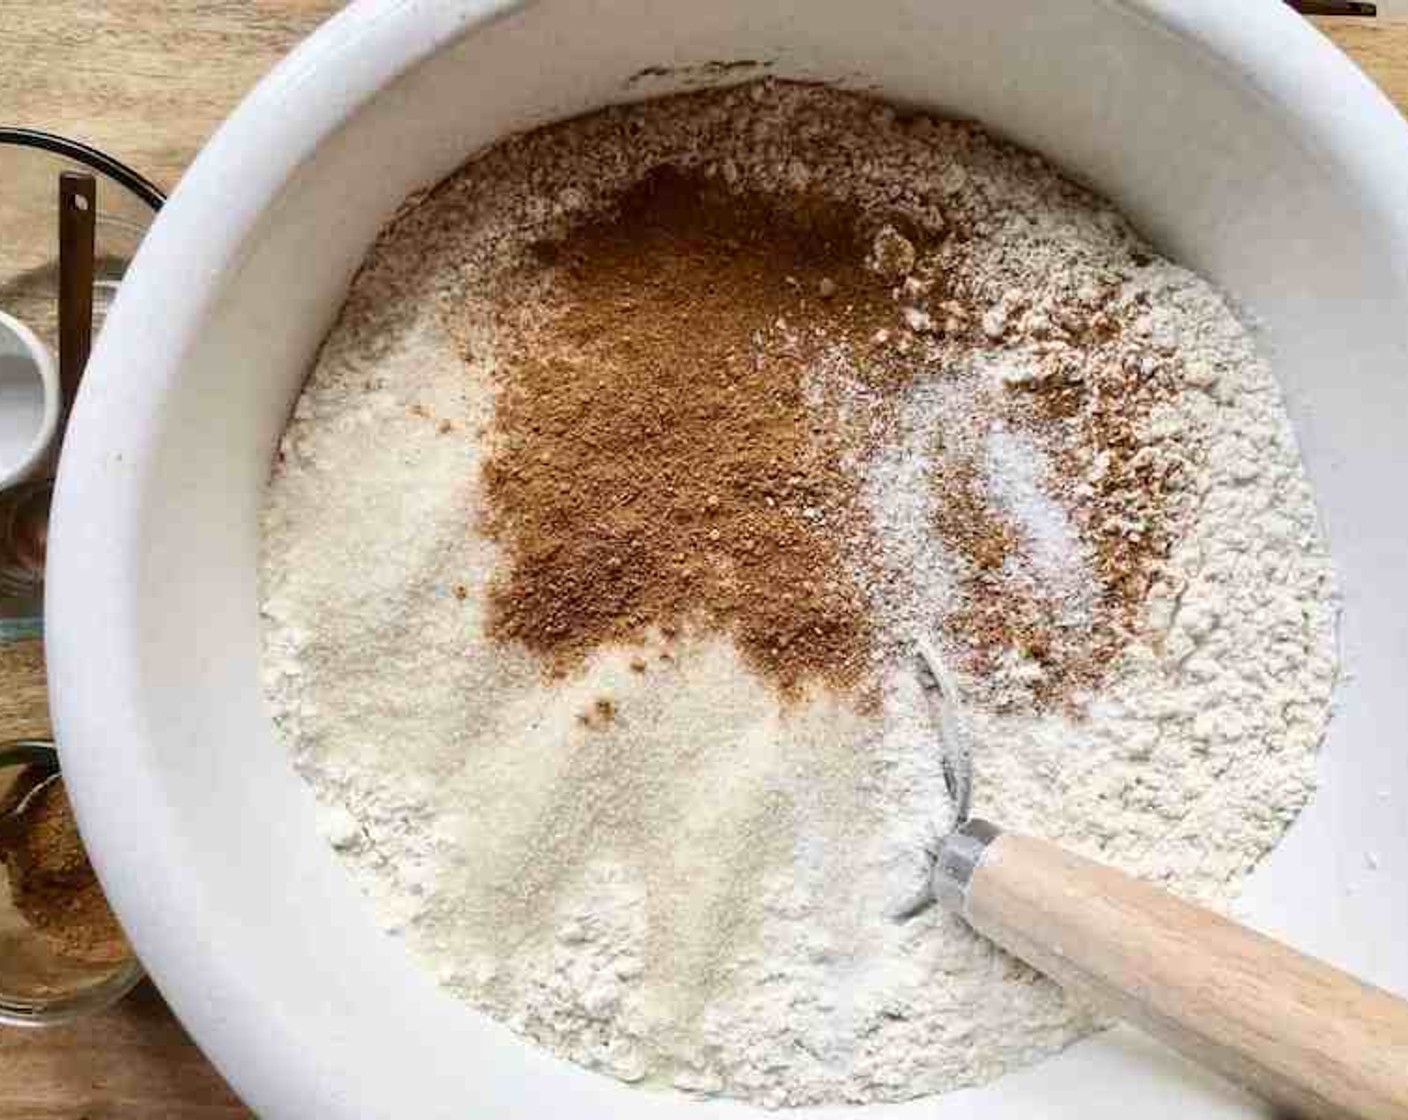 step 3 In a large bowl whisk together the Unbleached All Purpose Flour (6 cups), Granulated Sugar (1 cup), 2 tsp of Pumpkin Pie Spice, and Salt (3/4 tsp).